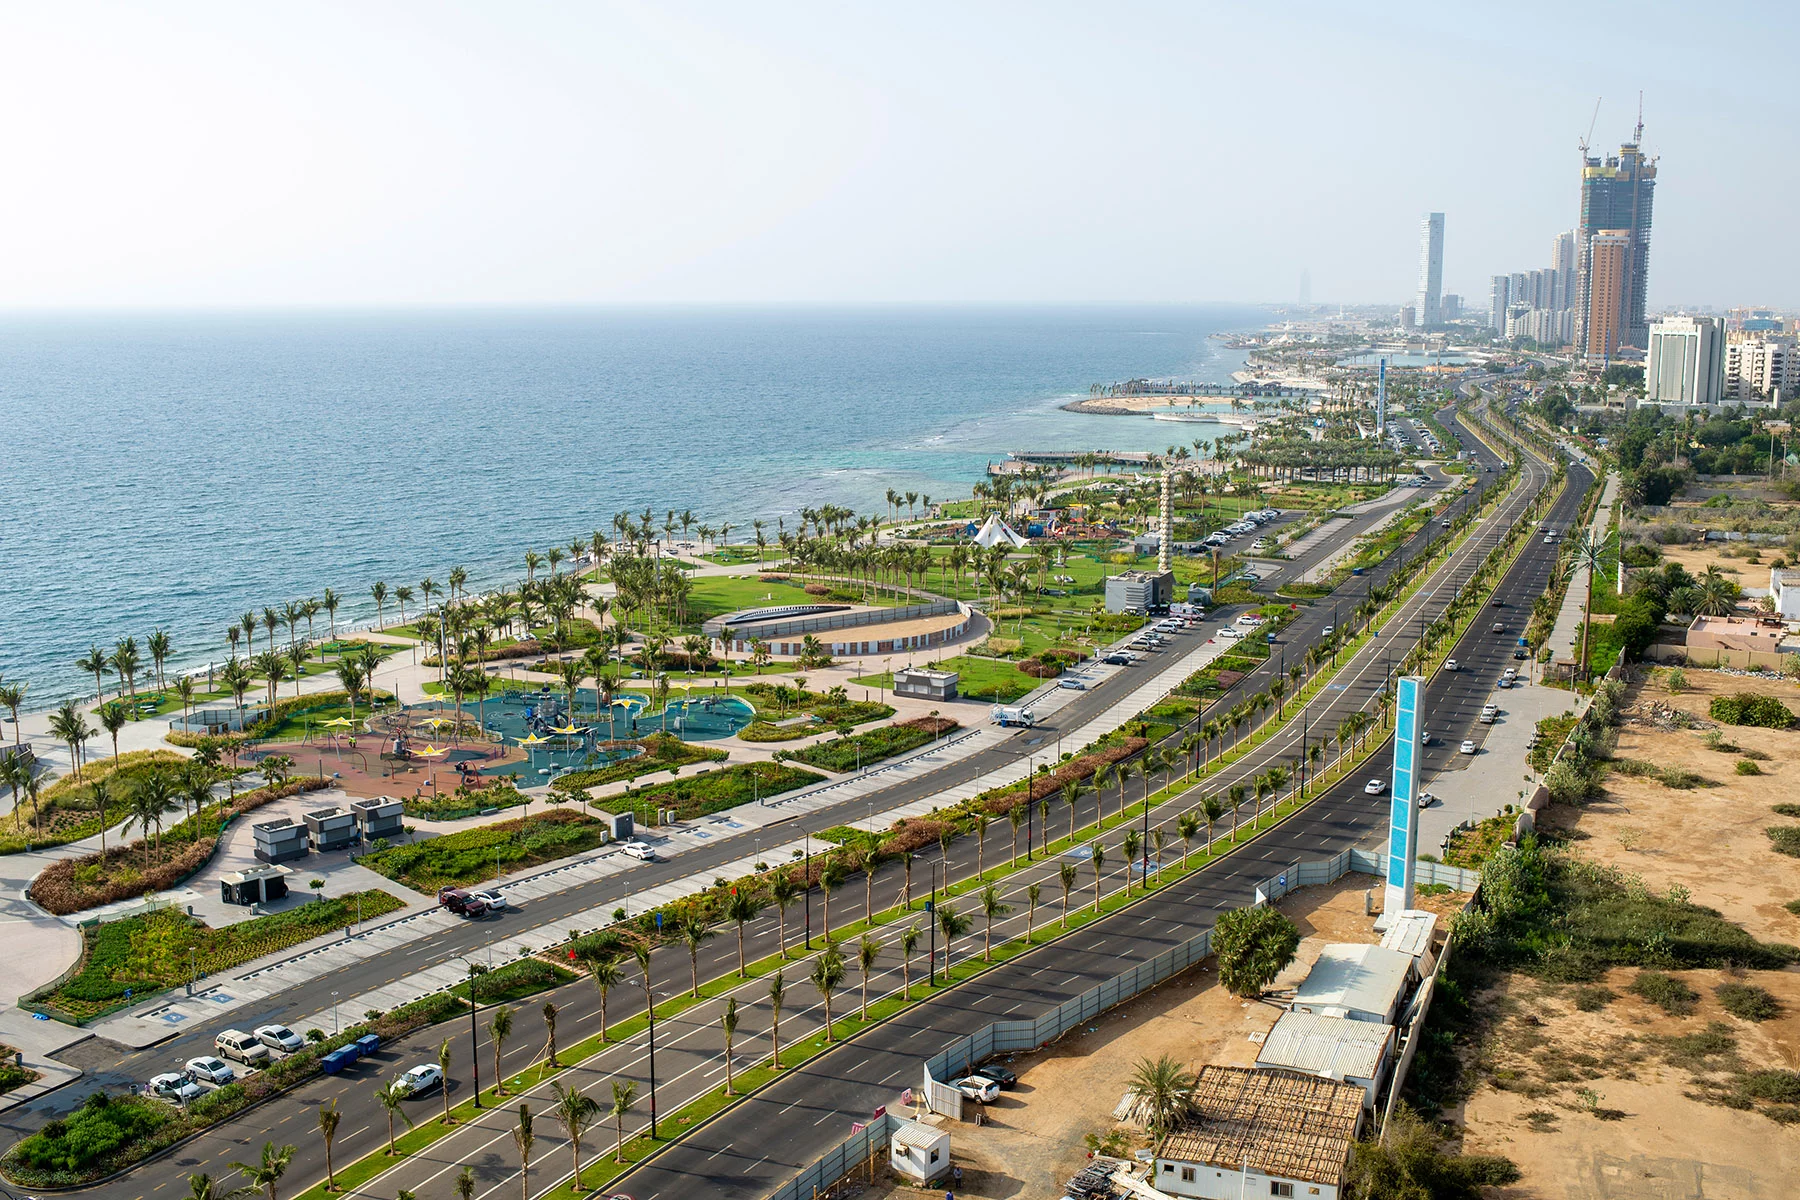 An aerial view of Jeddah